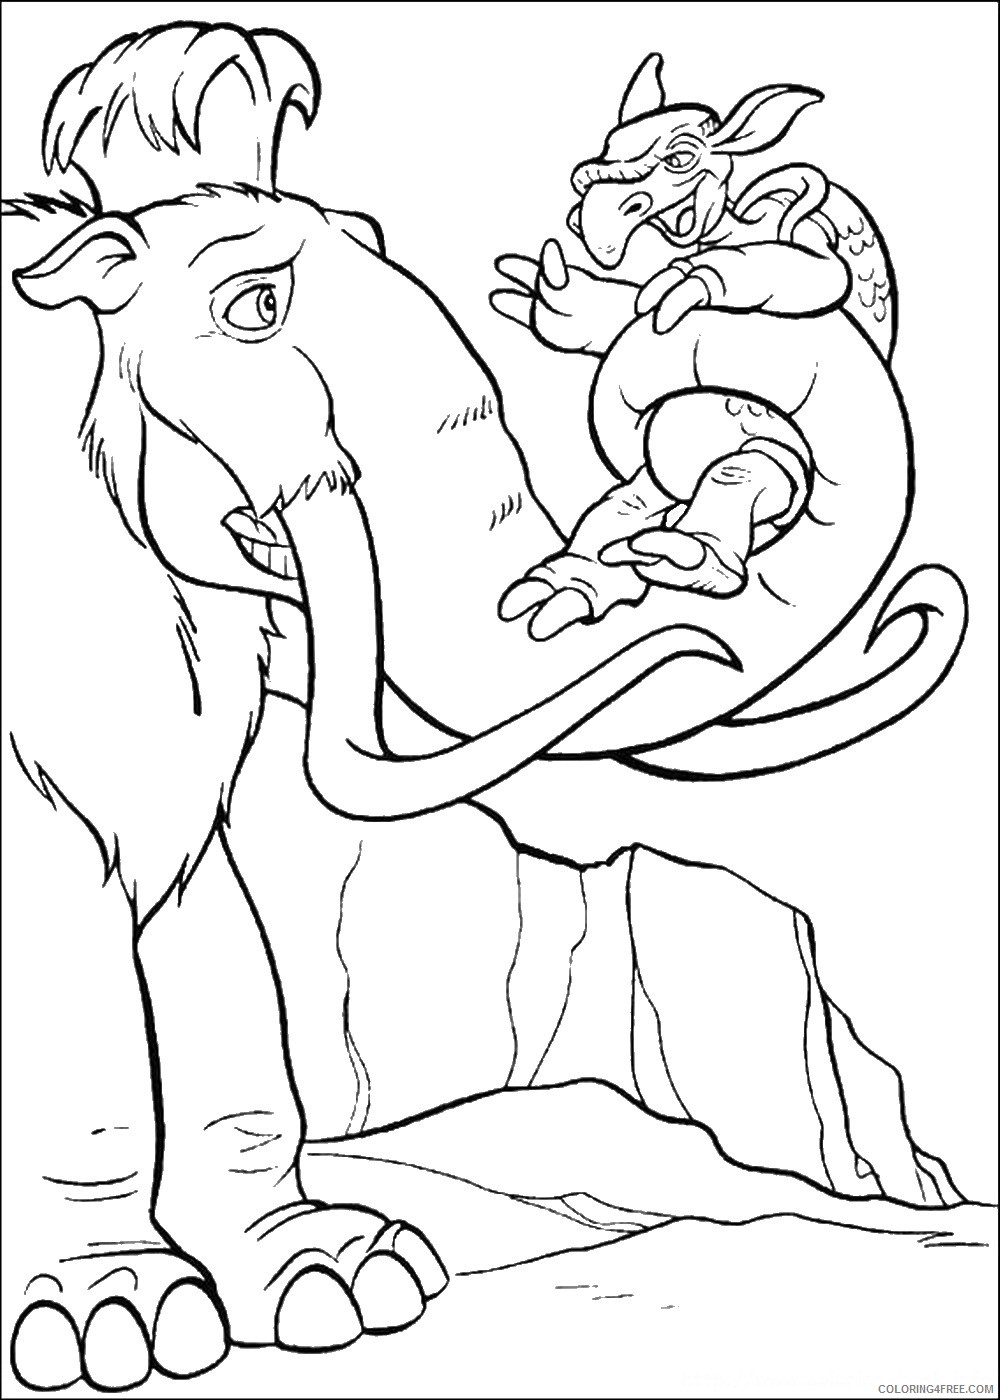 Ice Age Coloring Pages Cartoons ice age 18 Printable 2020 3387 Coloring4free